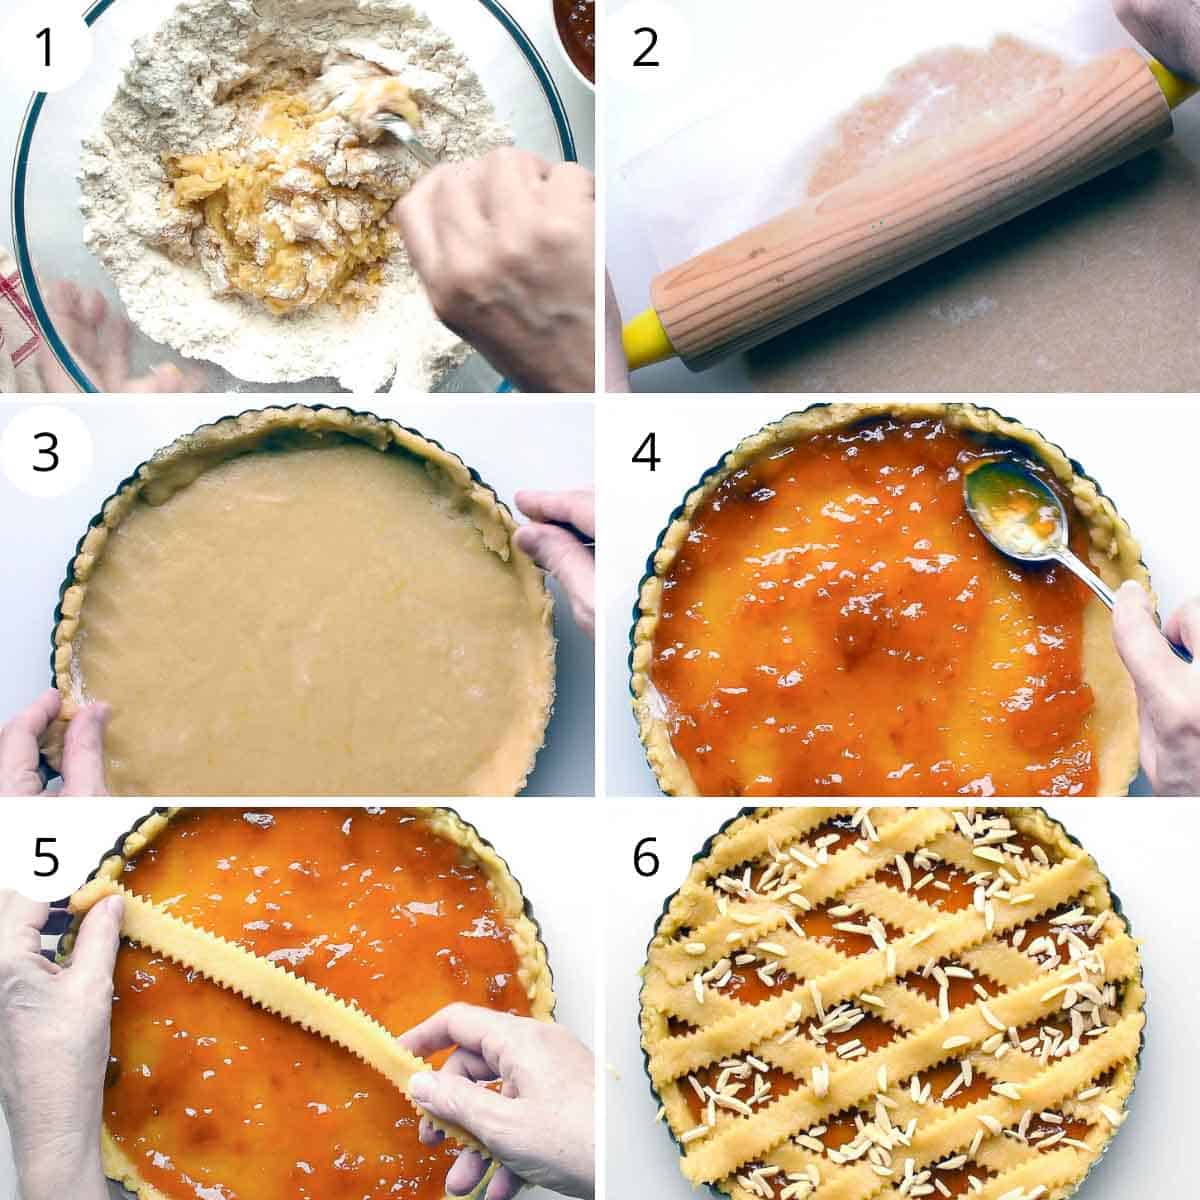 6 images showing steps for preparing apricot crostata